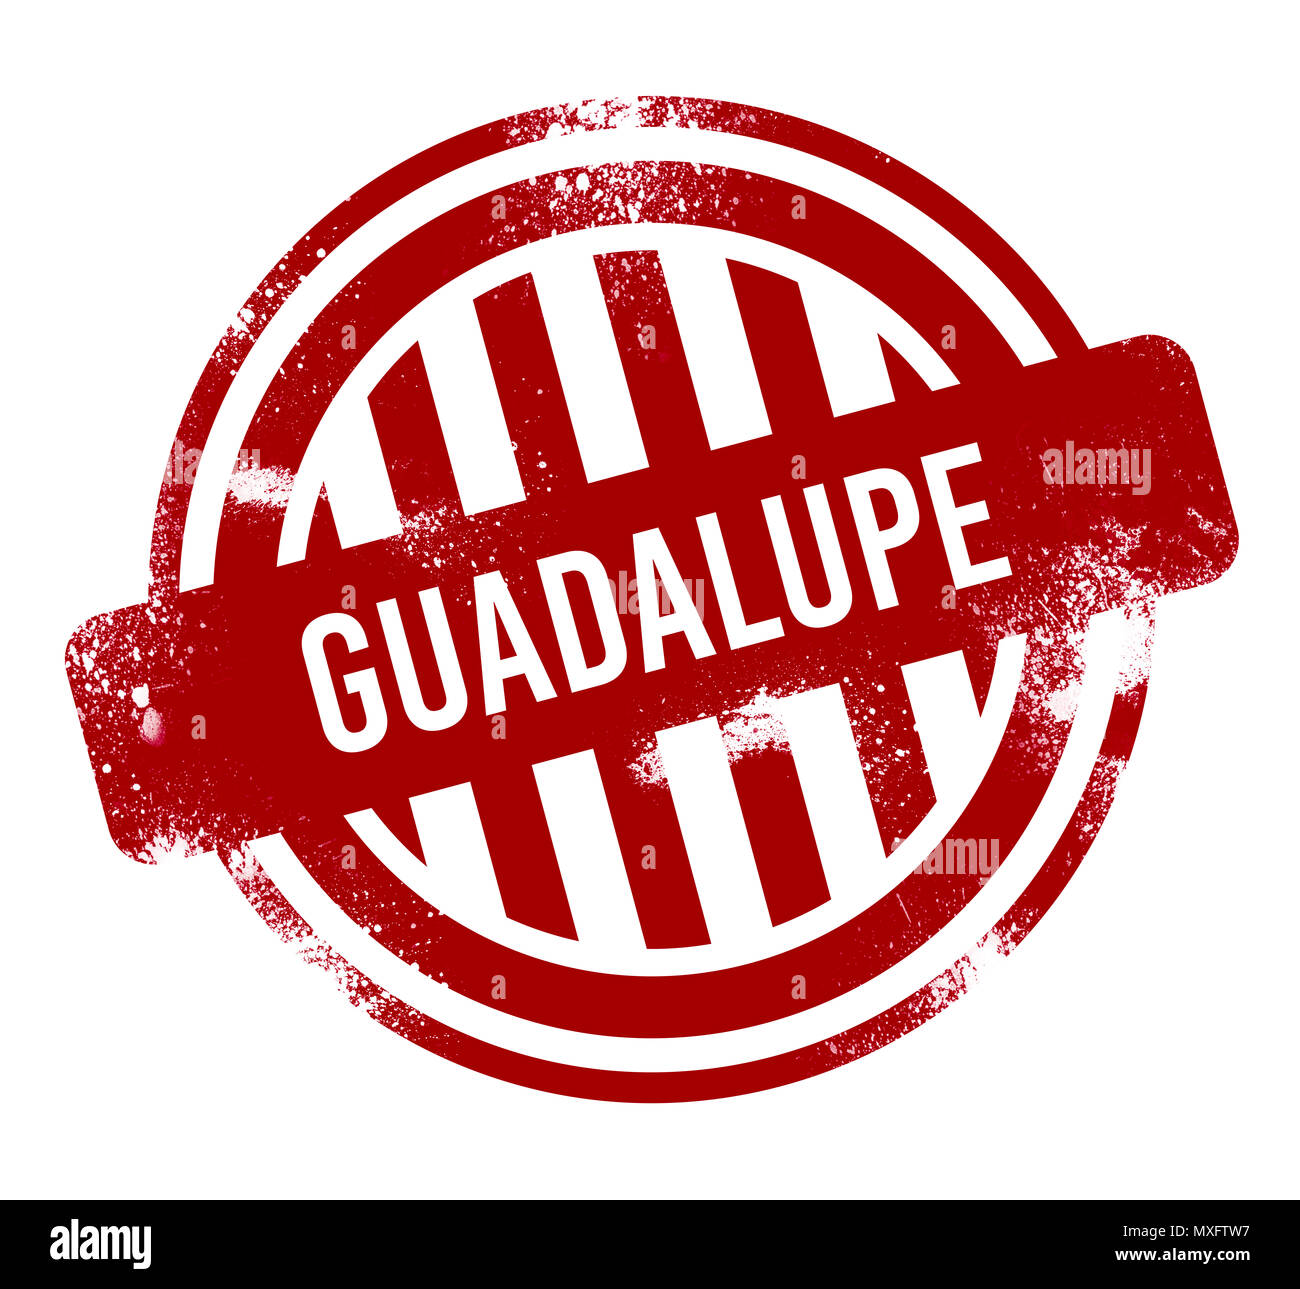 Guadalupe - grunge stamp, bouton rouge Banque D'Images